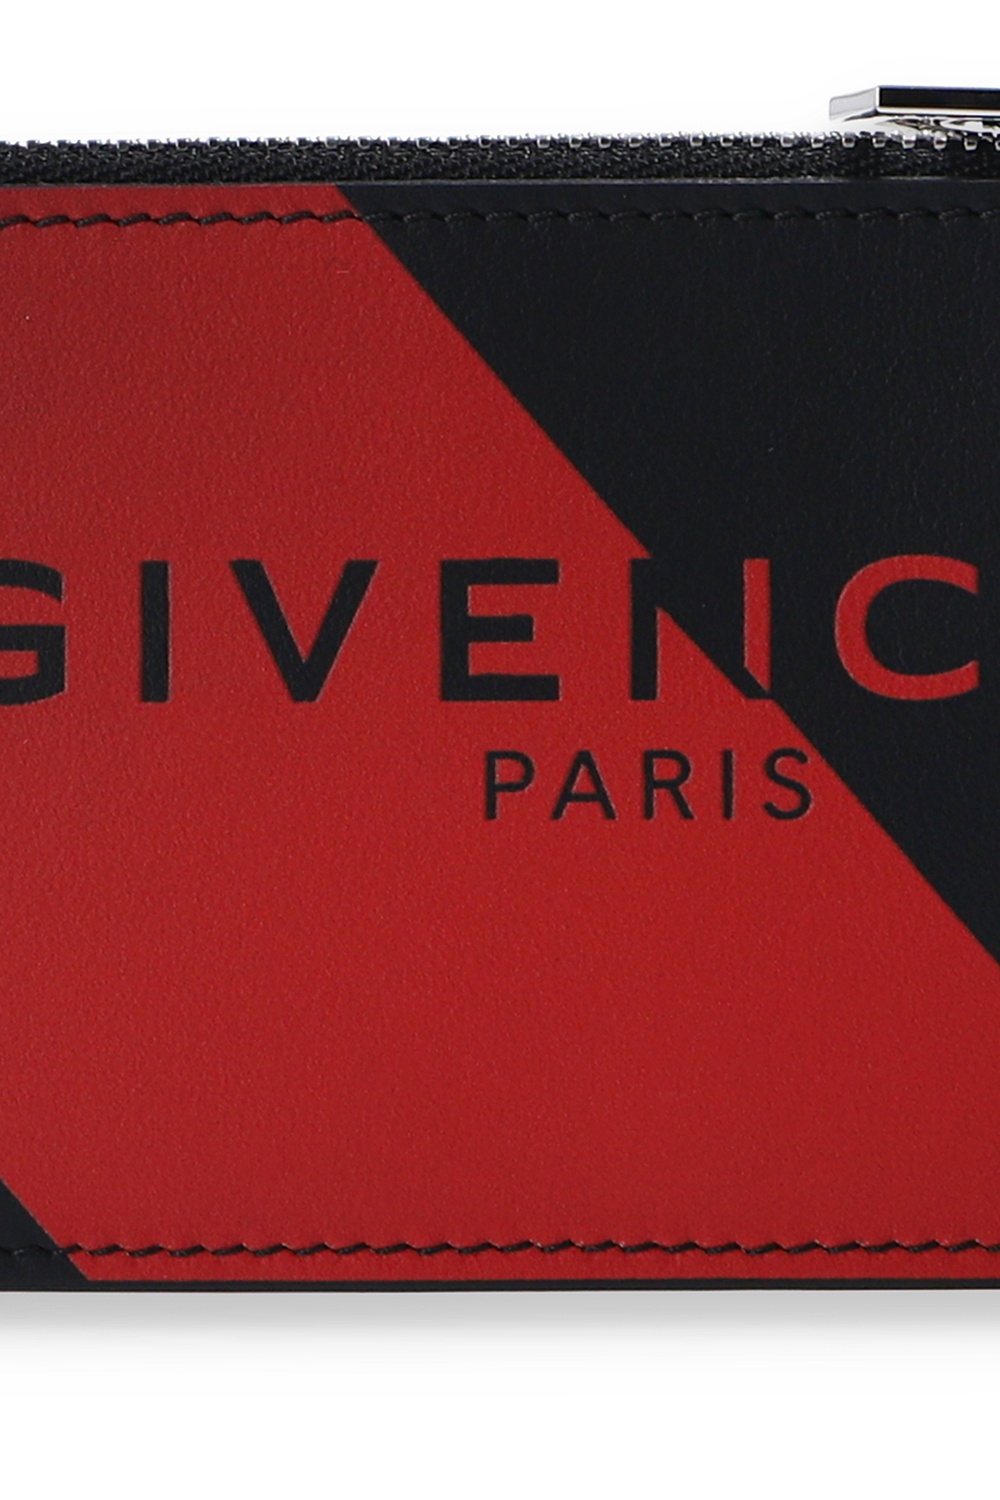 Givenchy Card holder | Men's Accessories | Vitkac